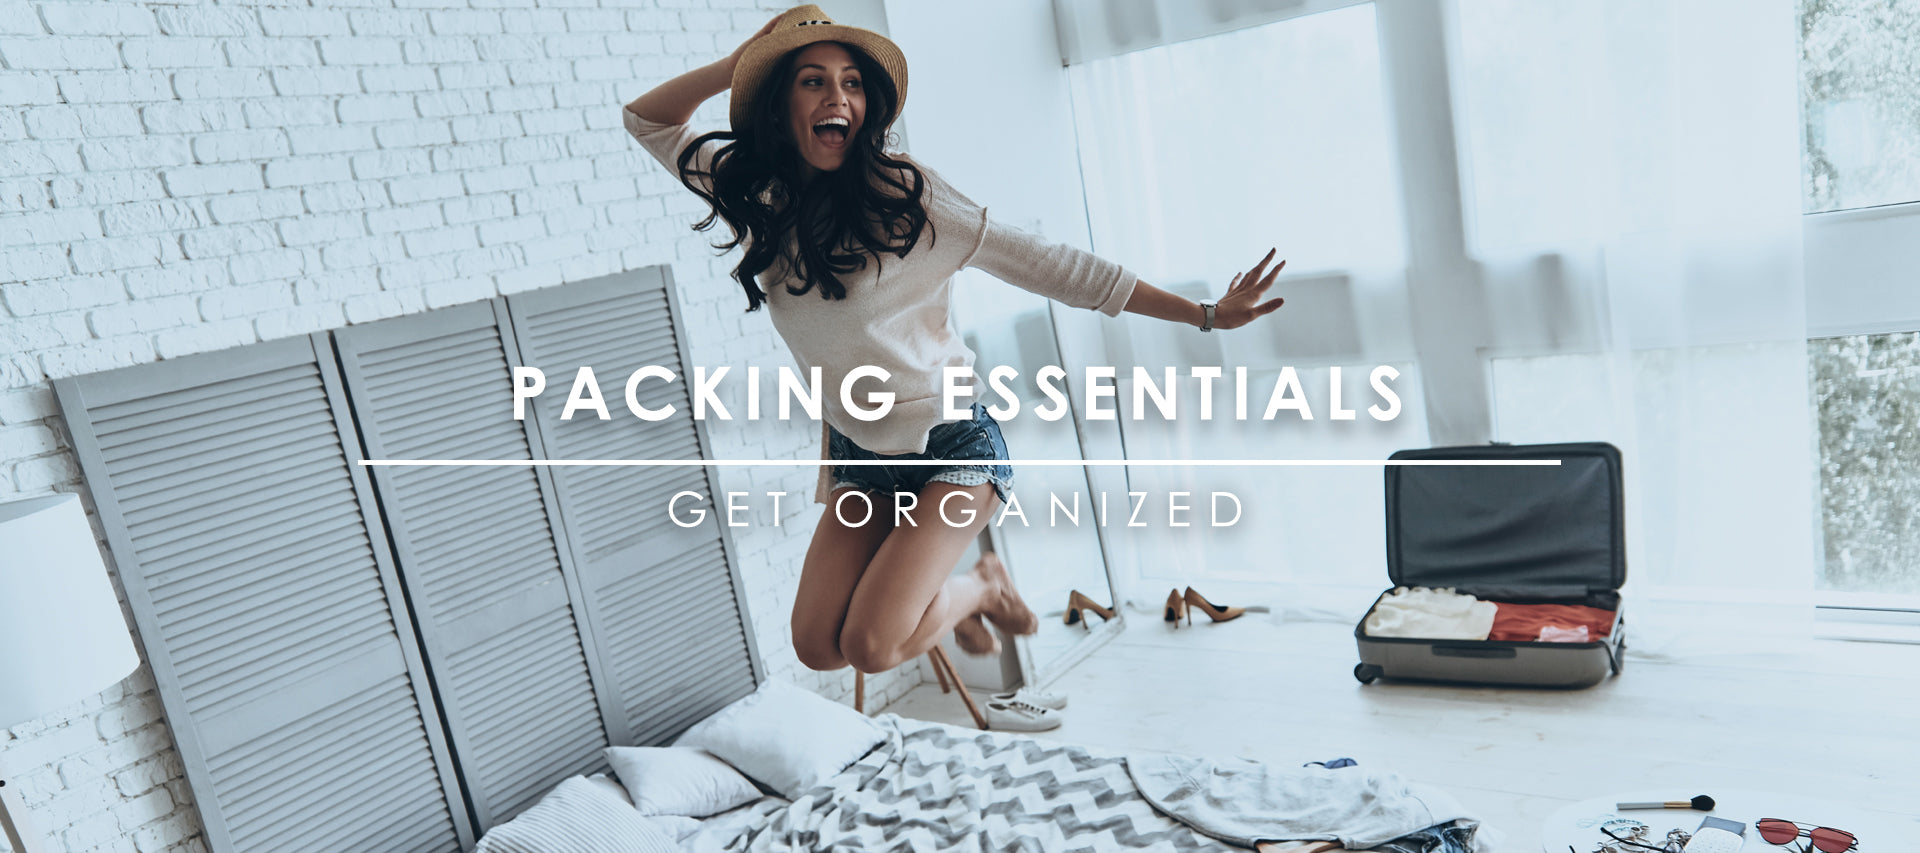 Luggage Options - How to Pack Everything